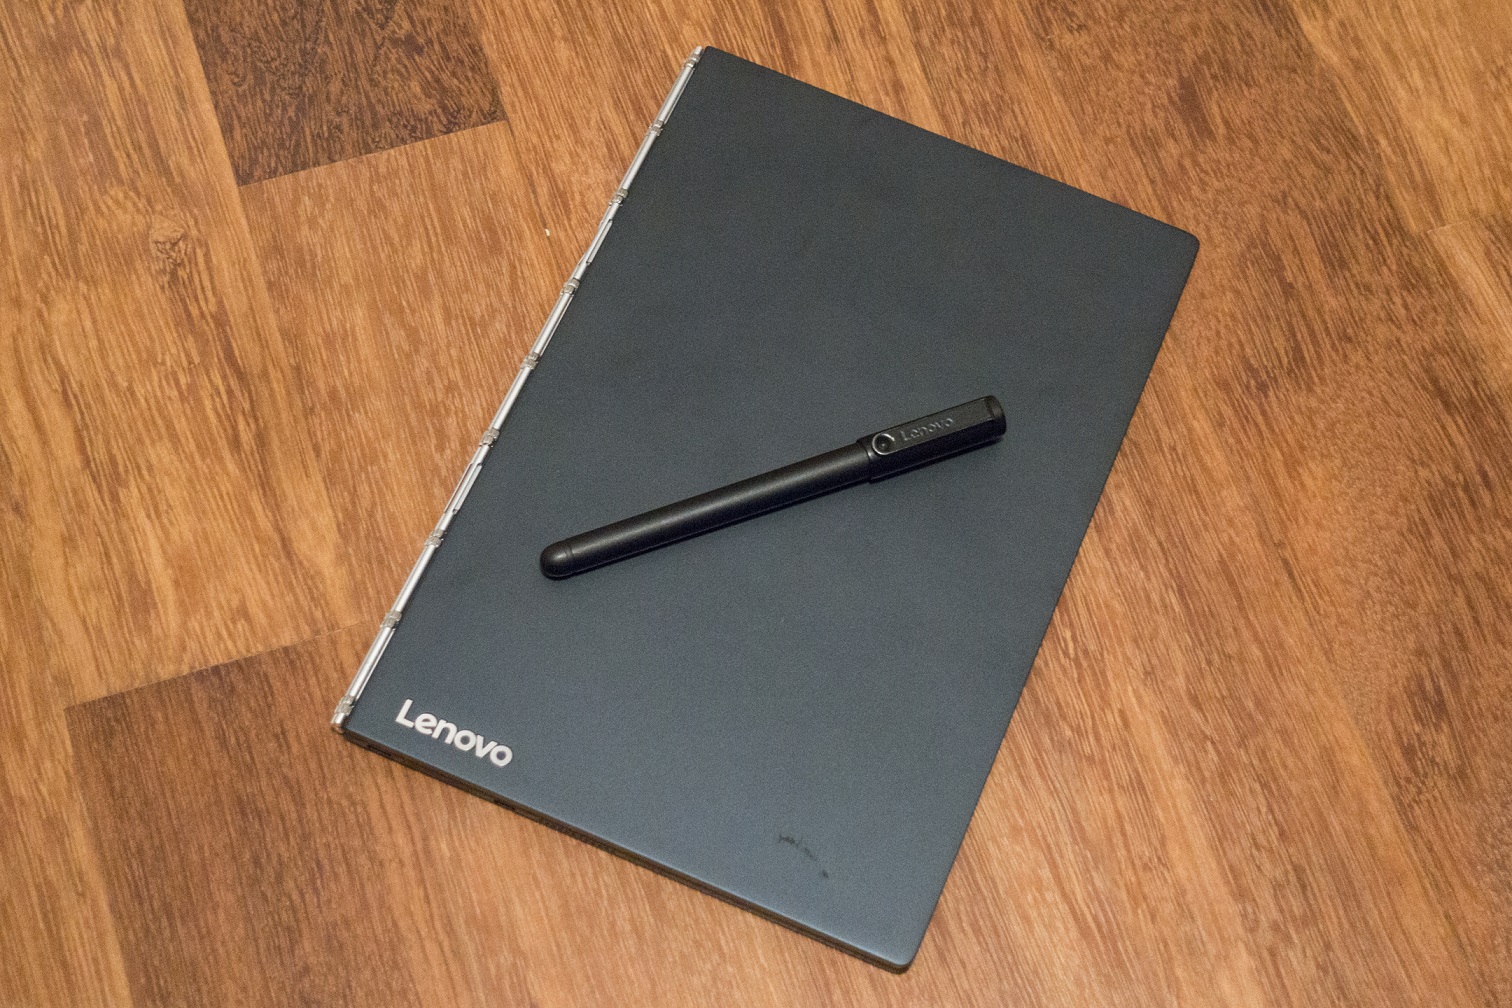 Lenovo Yoga Book: Have notebook, will travel